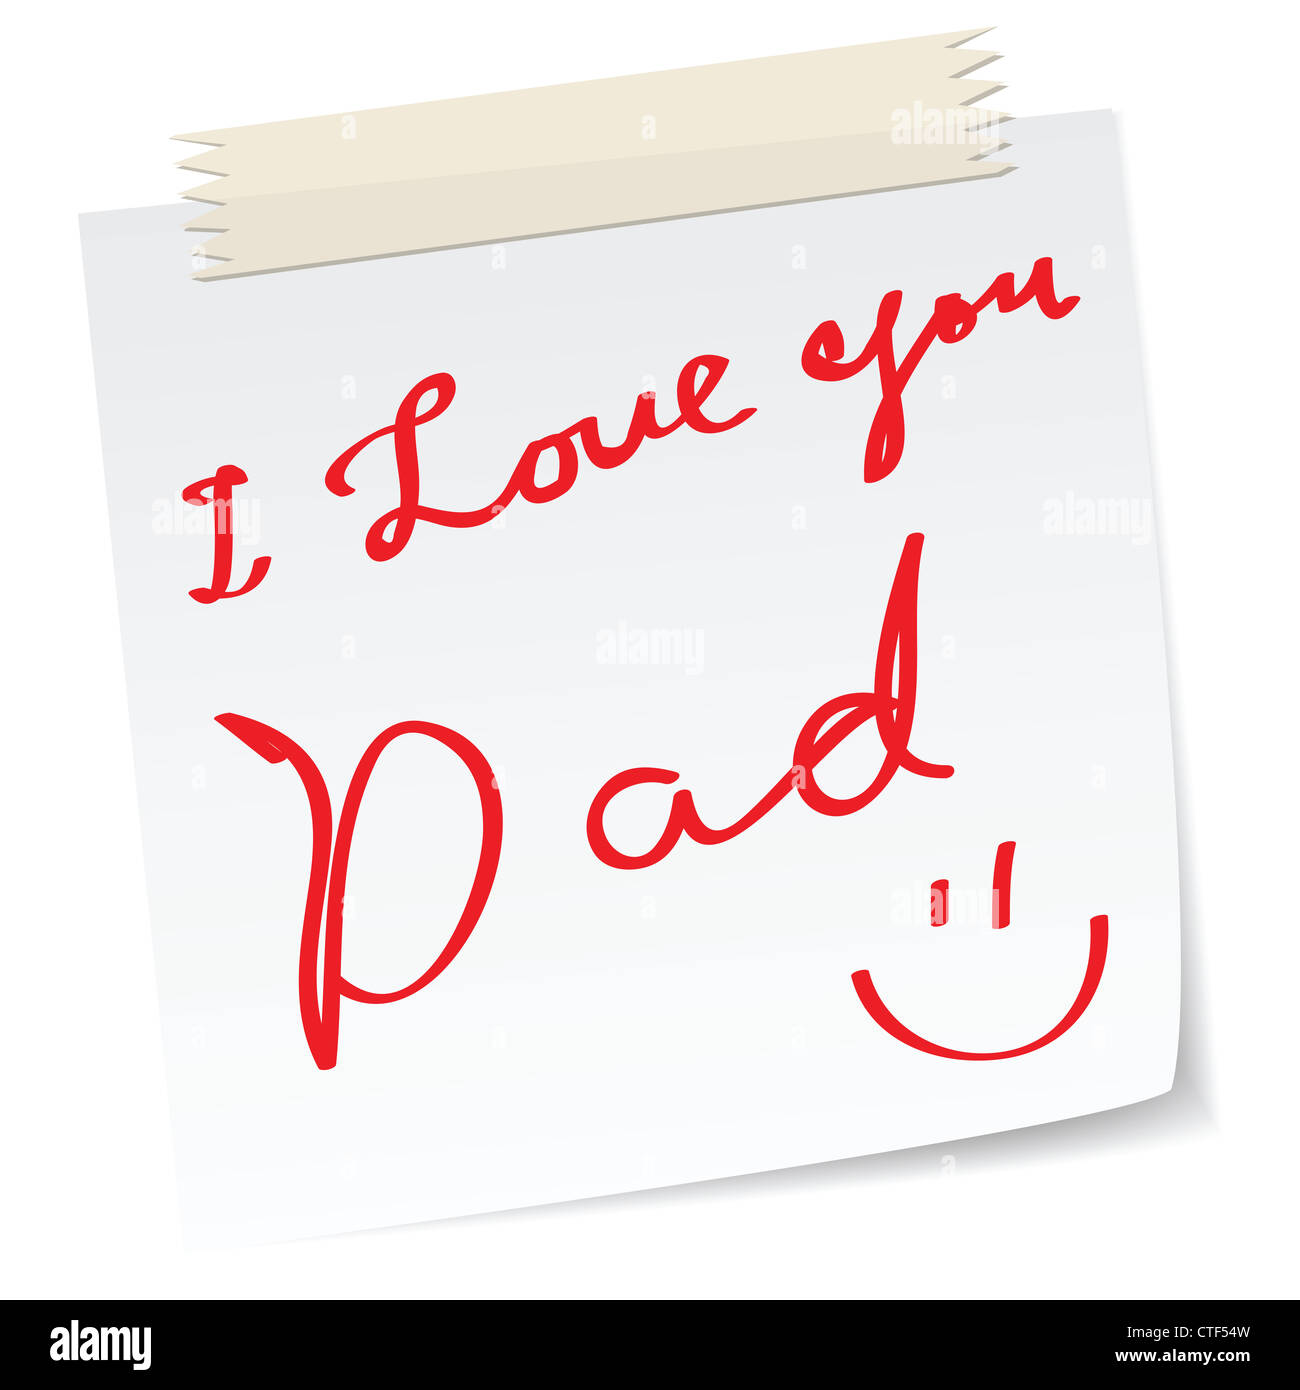 father day greetings on a paper notes, with handwritten message. Stock Photo